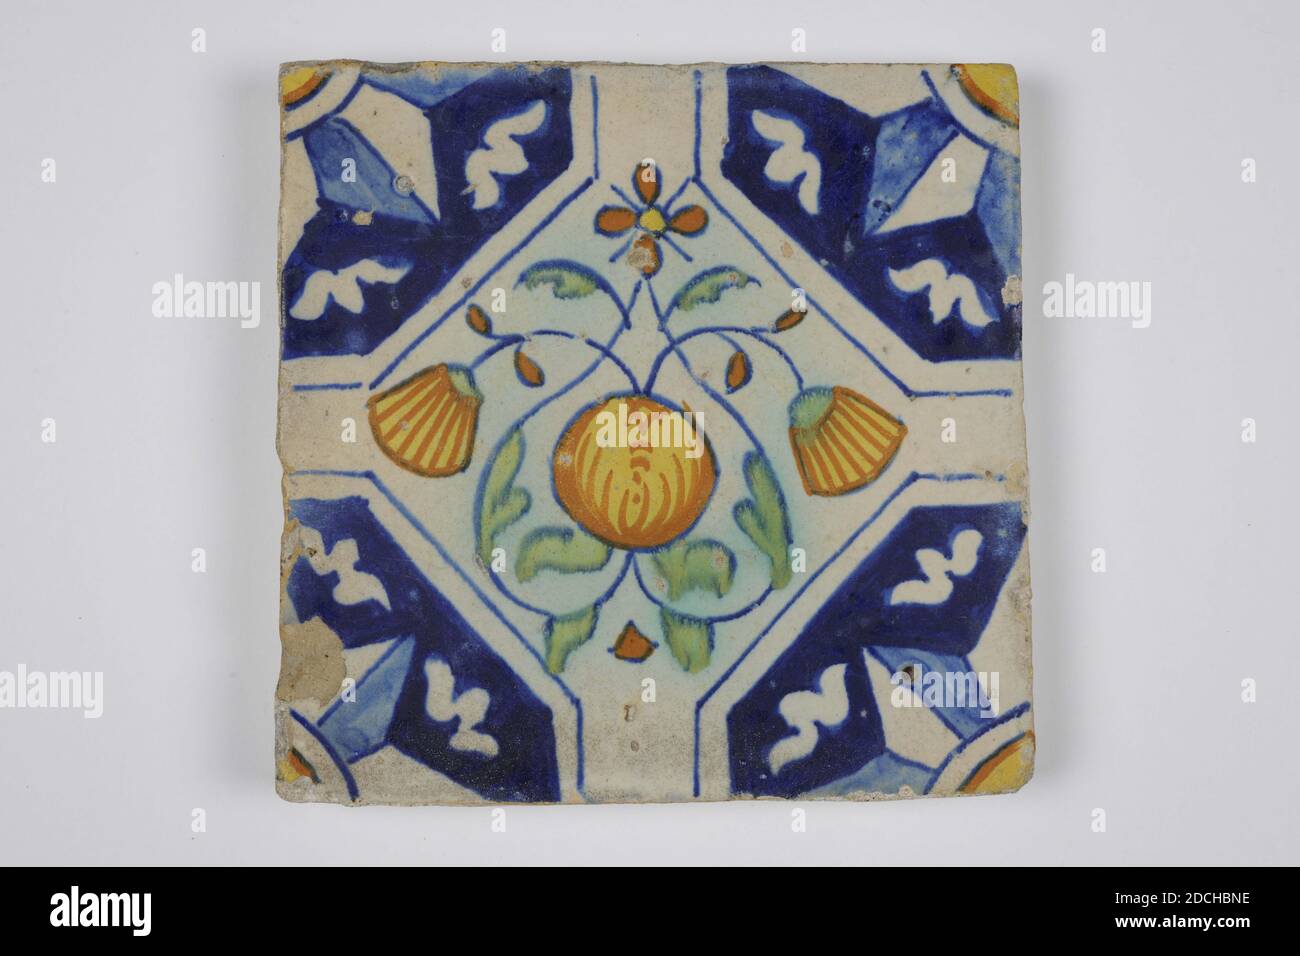 wall tile, Anonymous, first half of the 17th century, tin glaze, earthenware, General: 12.8 x 12.9 x 1.6cm (128 x 129 x 16mm), pomegranate, flower, Northern Netherlands, Earthenware wall tile covered with tin glaze. Multicolored painted in blue, orange brown, green and yellow with a stylized symmetrical pattern of a pomegranate and squares marigolds. The tile has a quarter star as corner motif, 1985 Stock Photo